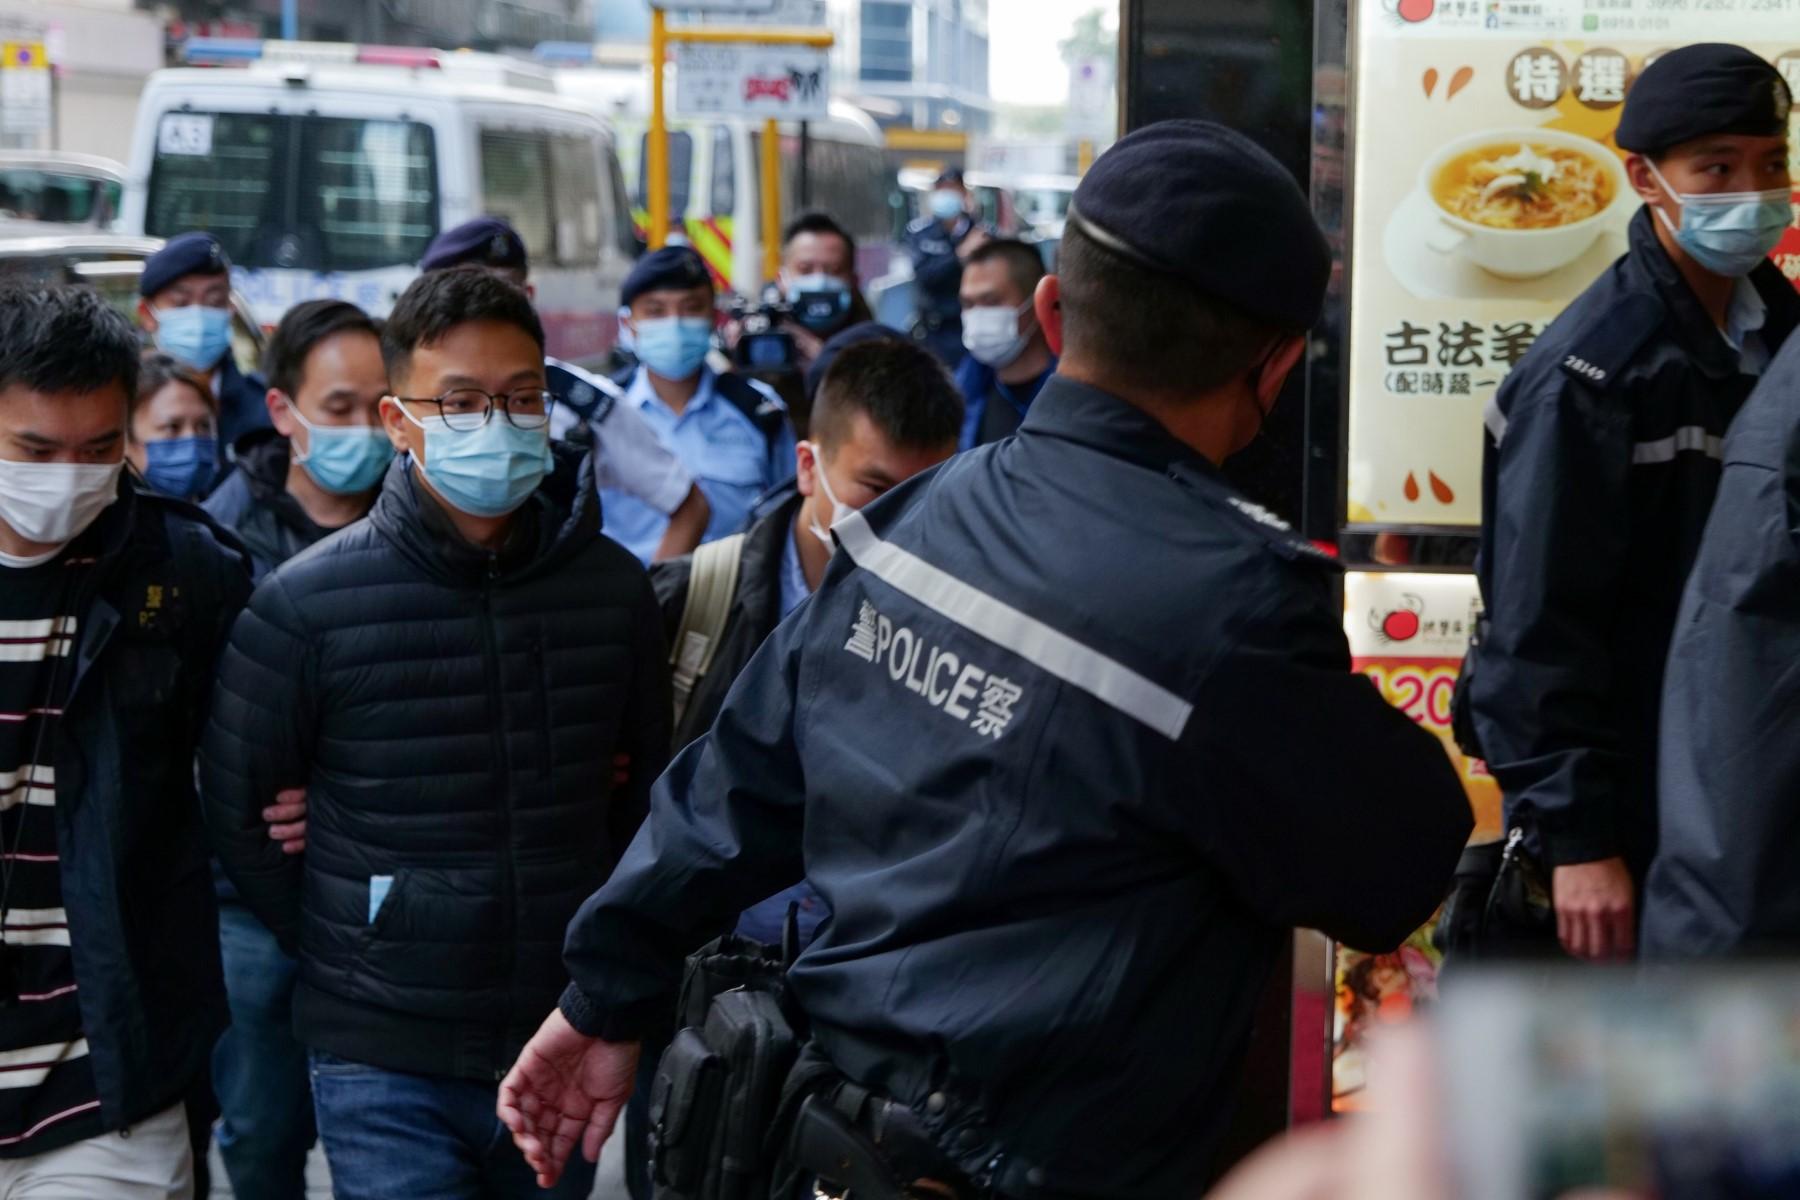 Stand News chief editor Patrick Lam (second left, foreground) is brought to the news outlet's office building in handcuffs after police were deployed to search the premises in Hong Kong's Kwun Tong district on Dec 29. Photo: AFP